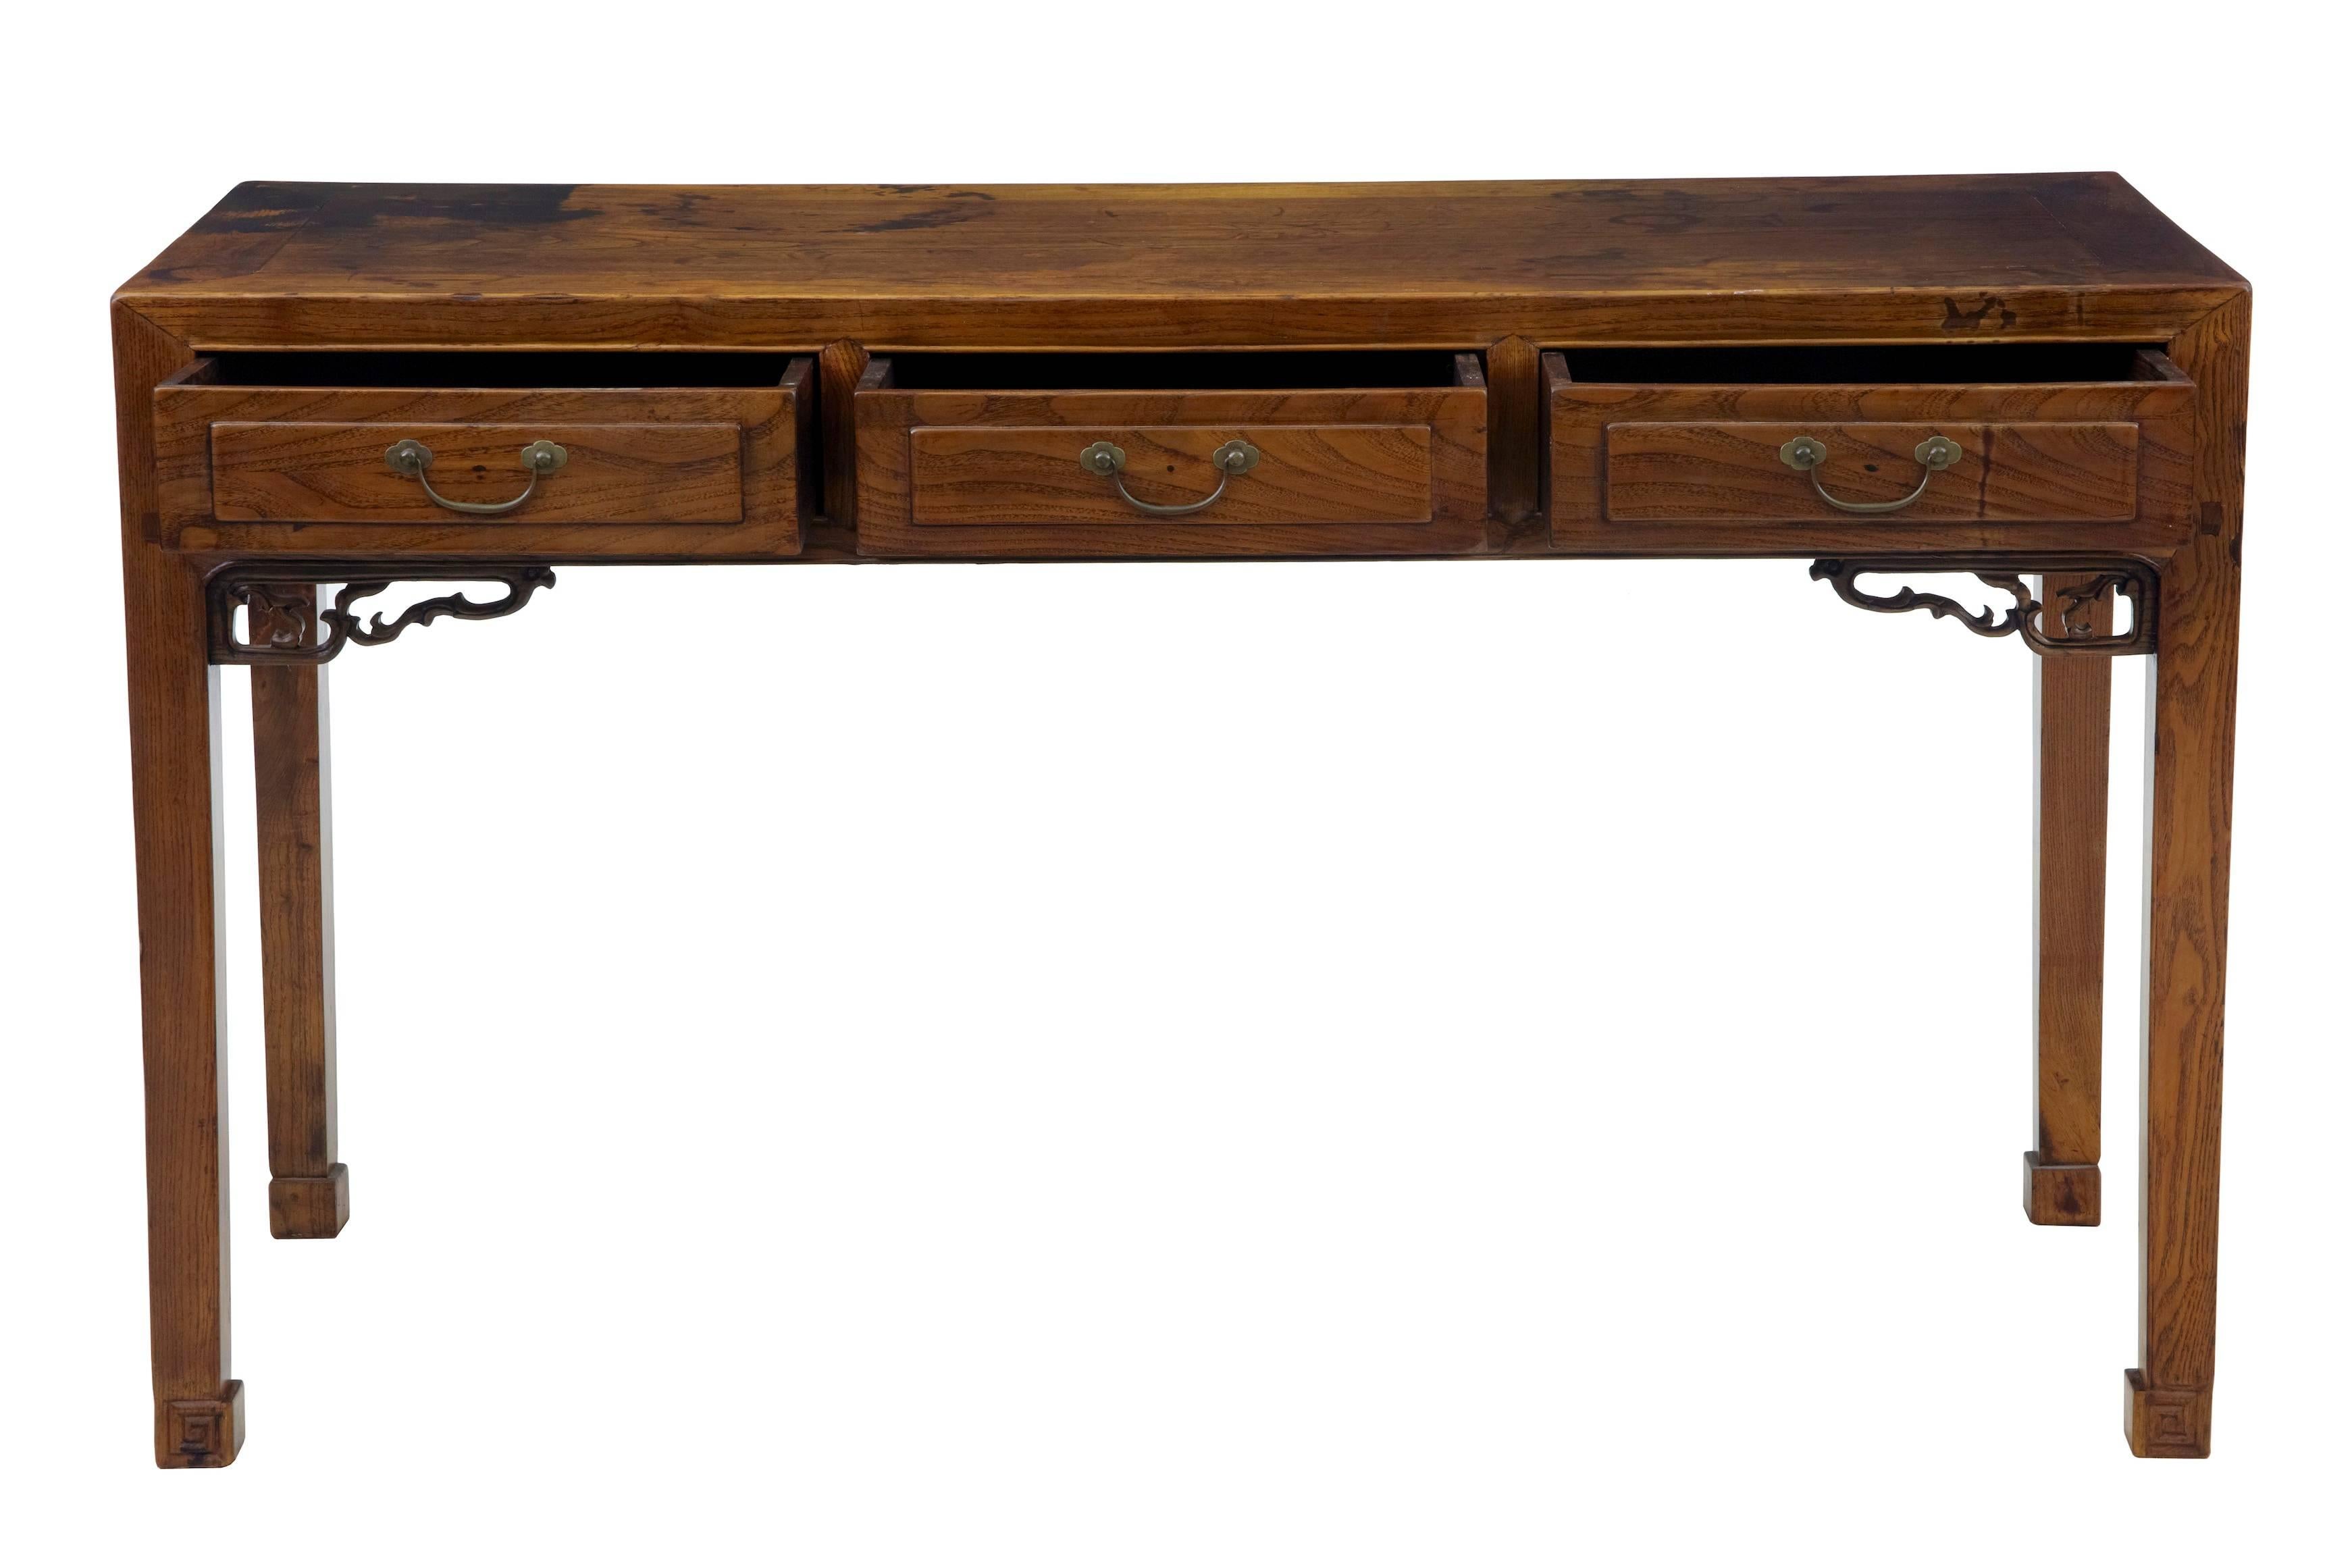 Rich colored Chinese occasional table, circa 1890.
Three drawers below which a carved detail to the front.
Heavy staining to the top which lends to its character.
Measures:
Height 31 1/2